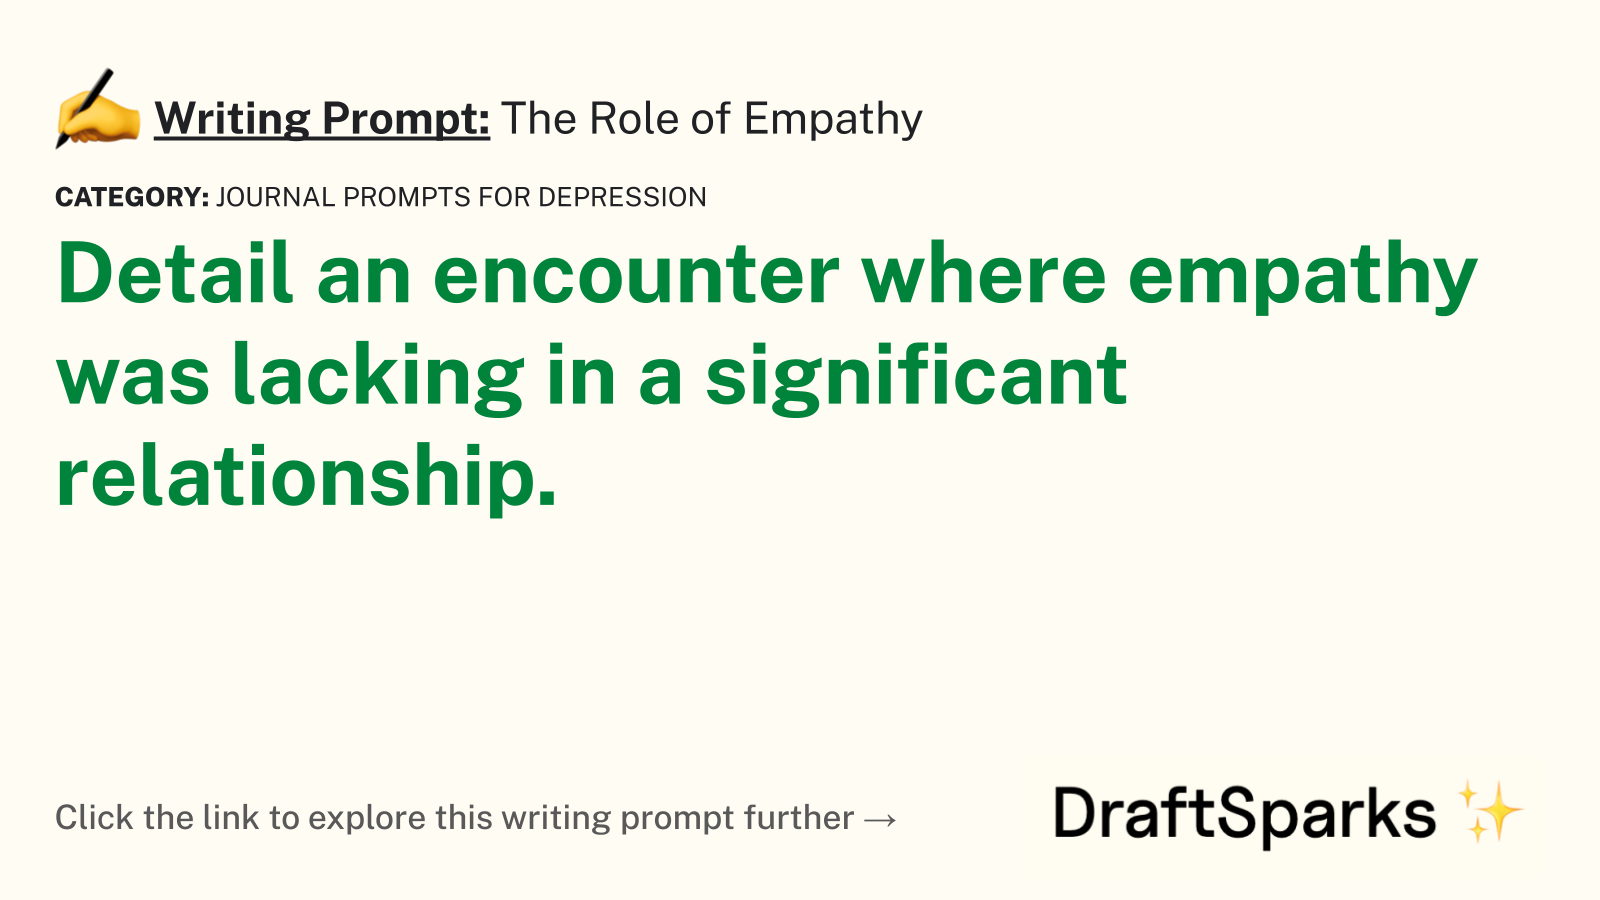 The Role of Empathy